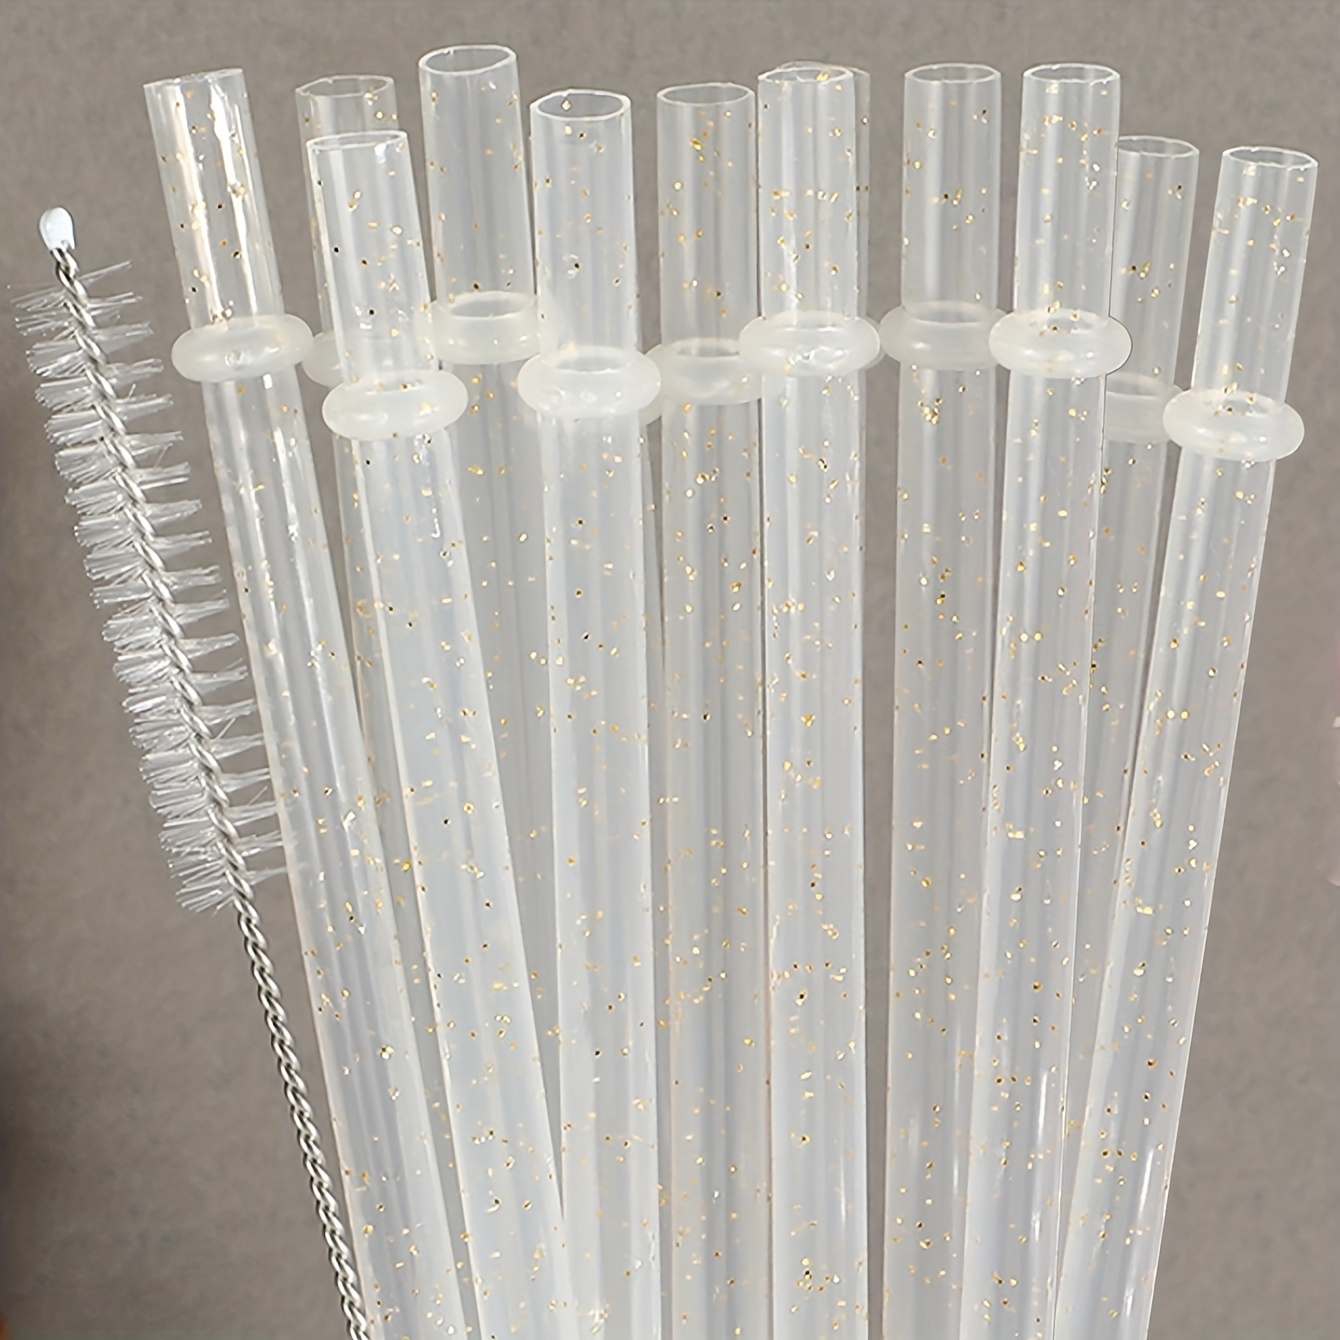 

12pcs Reusable Plastic Straws With Cleaning Brush, 9 Inches Long Straw, Fits 24oz-30oz Mason Jars/glass, Party Supplies